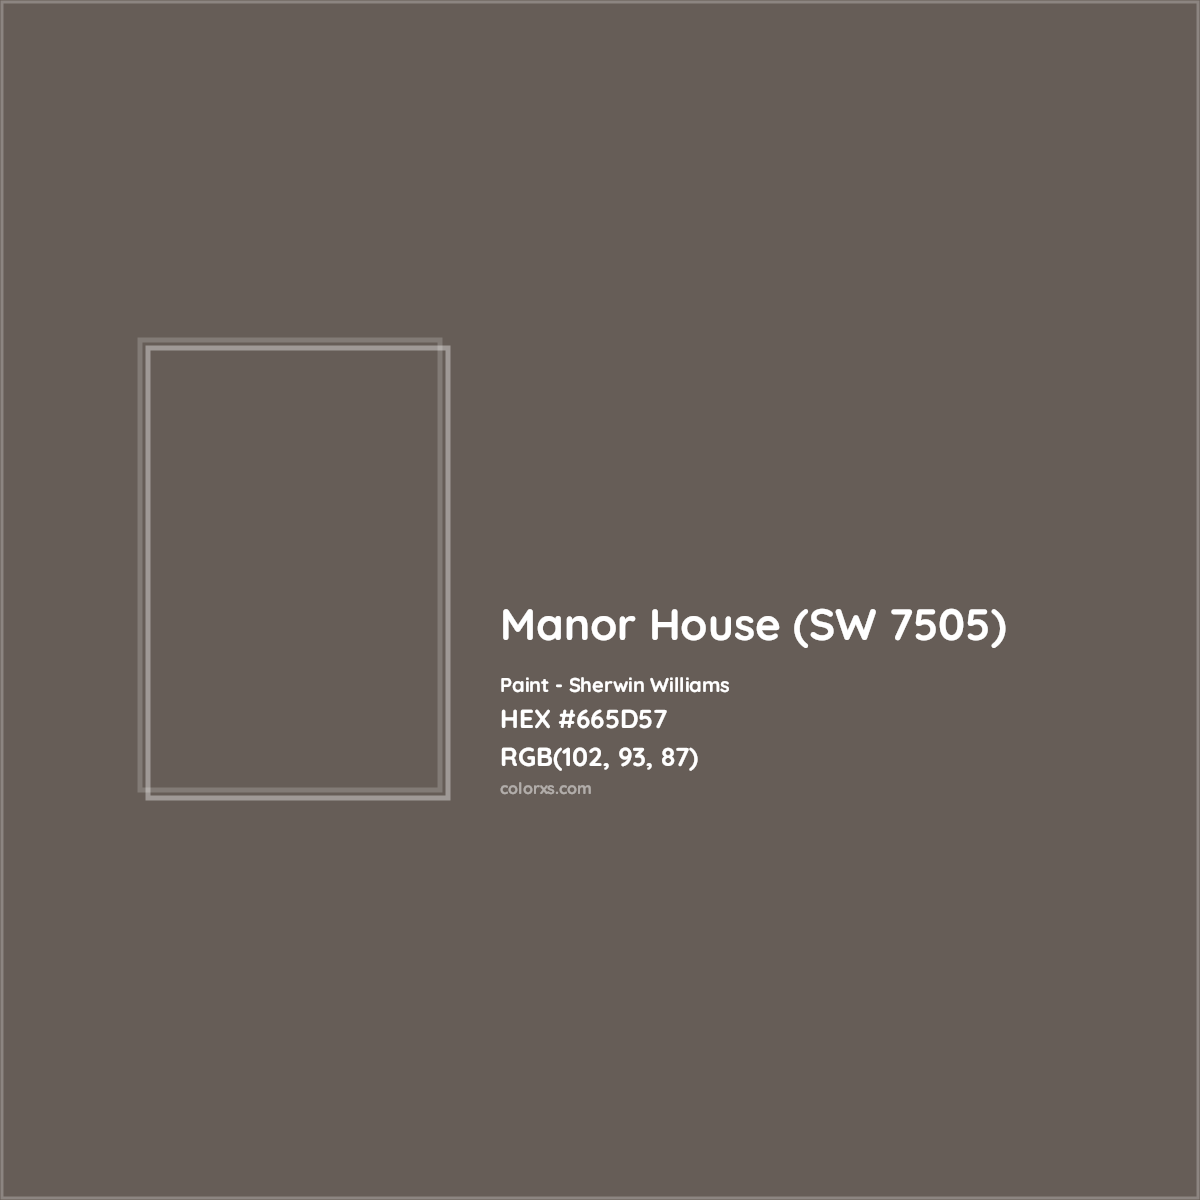 HEX #665D57 Manor House (SW 7505) Paint Sherwin Williams - Color Code